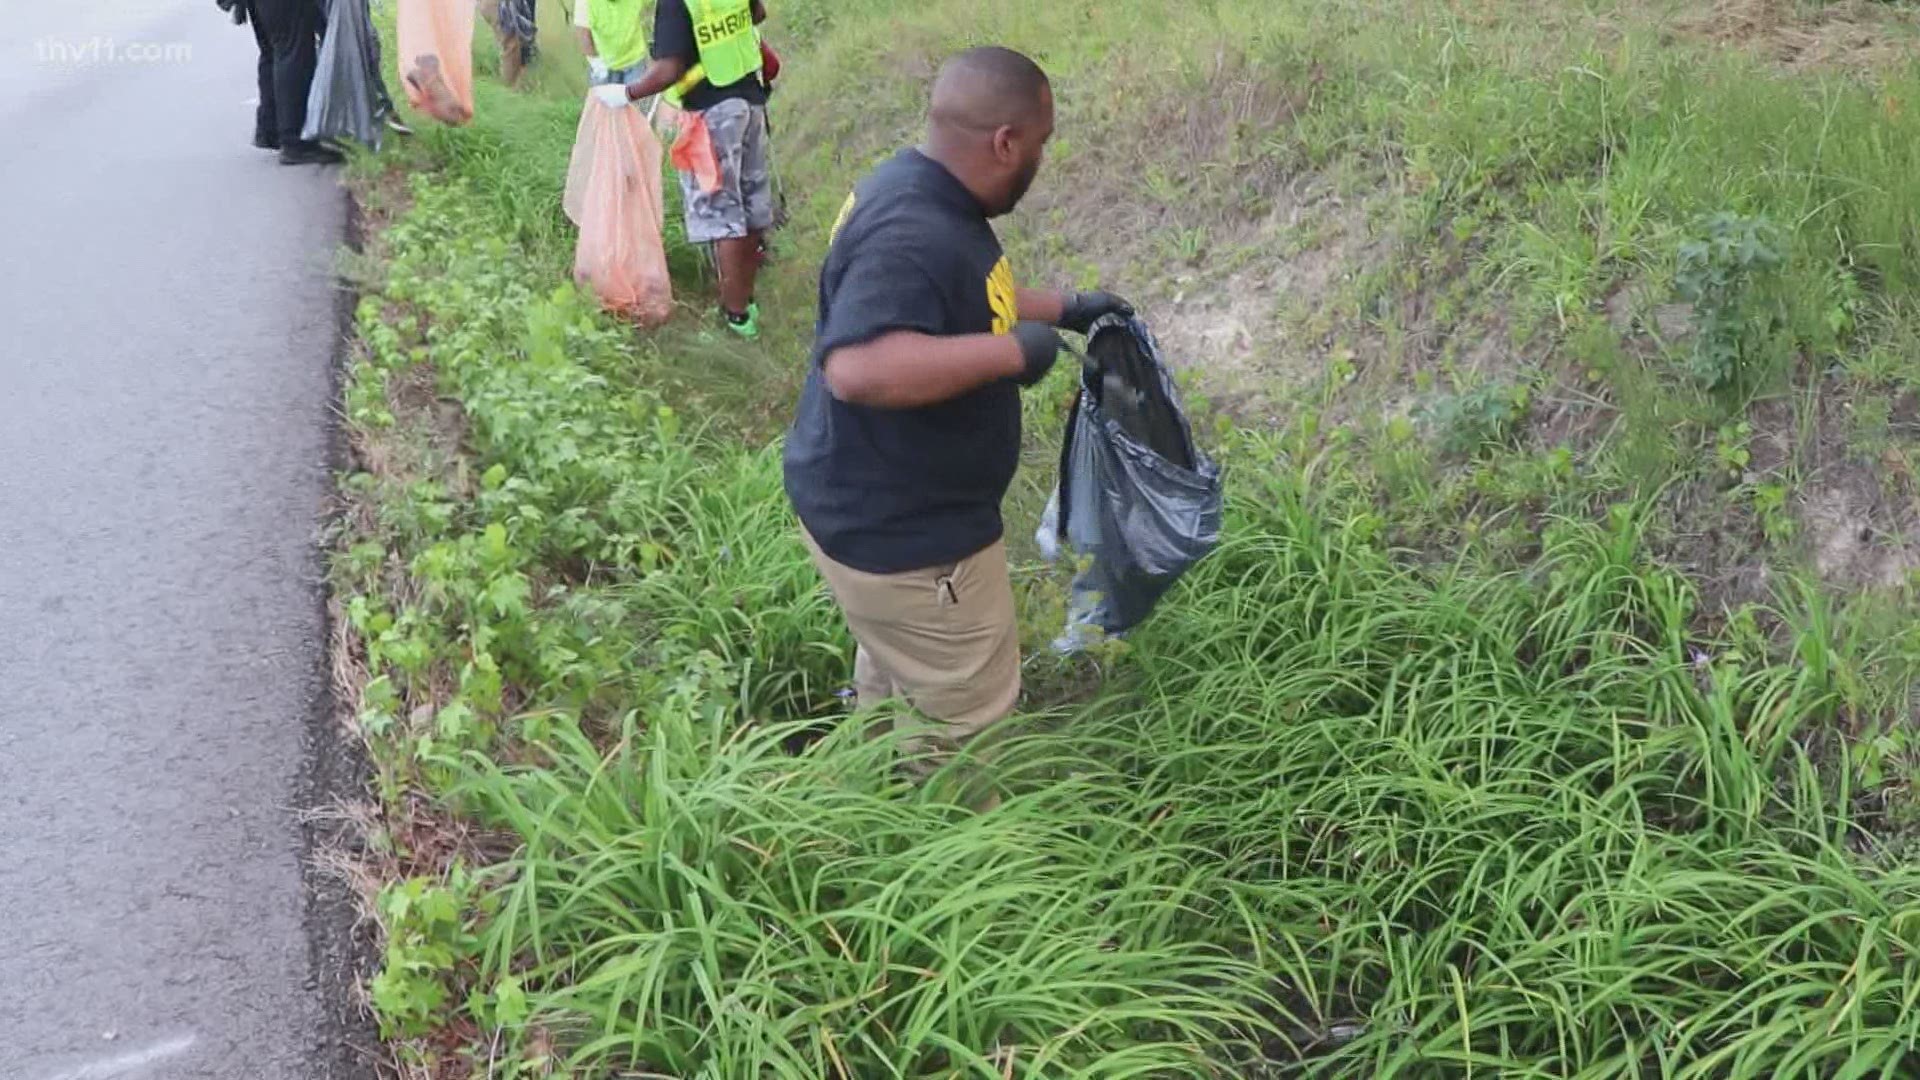 City leaders, university students, and residents came together for the city's first clean up since the pandemic started.